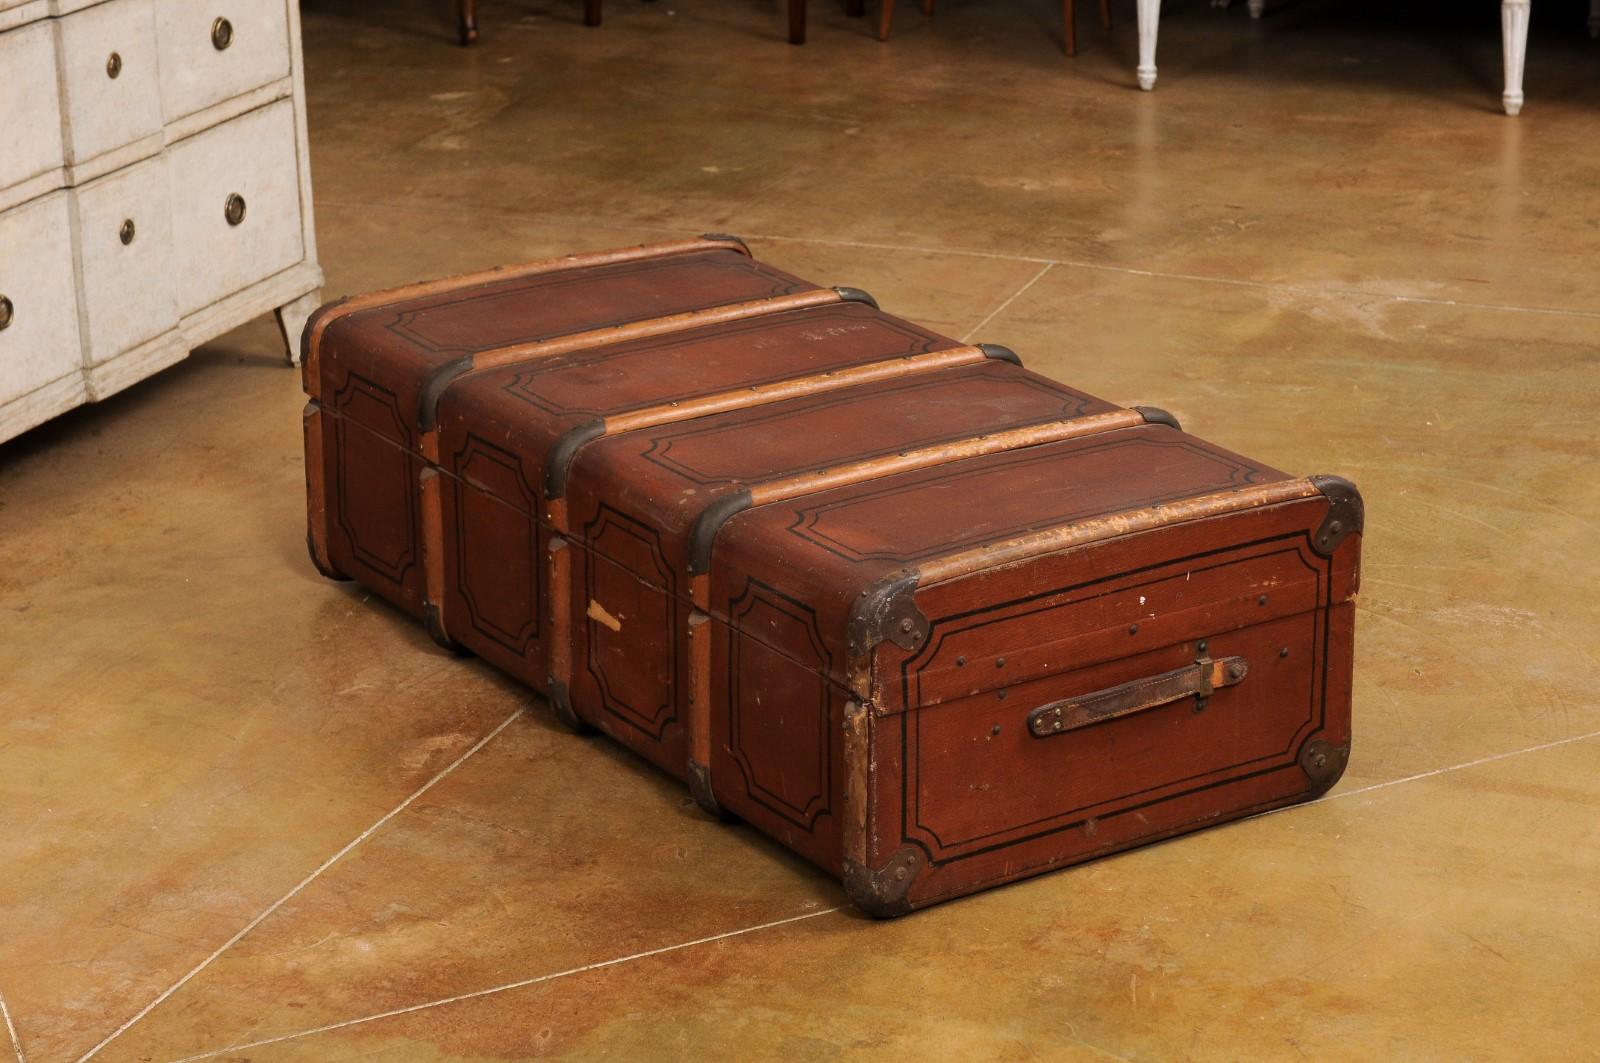 Italian 20th Century Leather, Wood and Brass Travel Trunk with Rustic Character For Sale 6